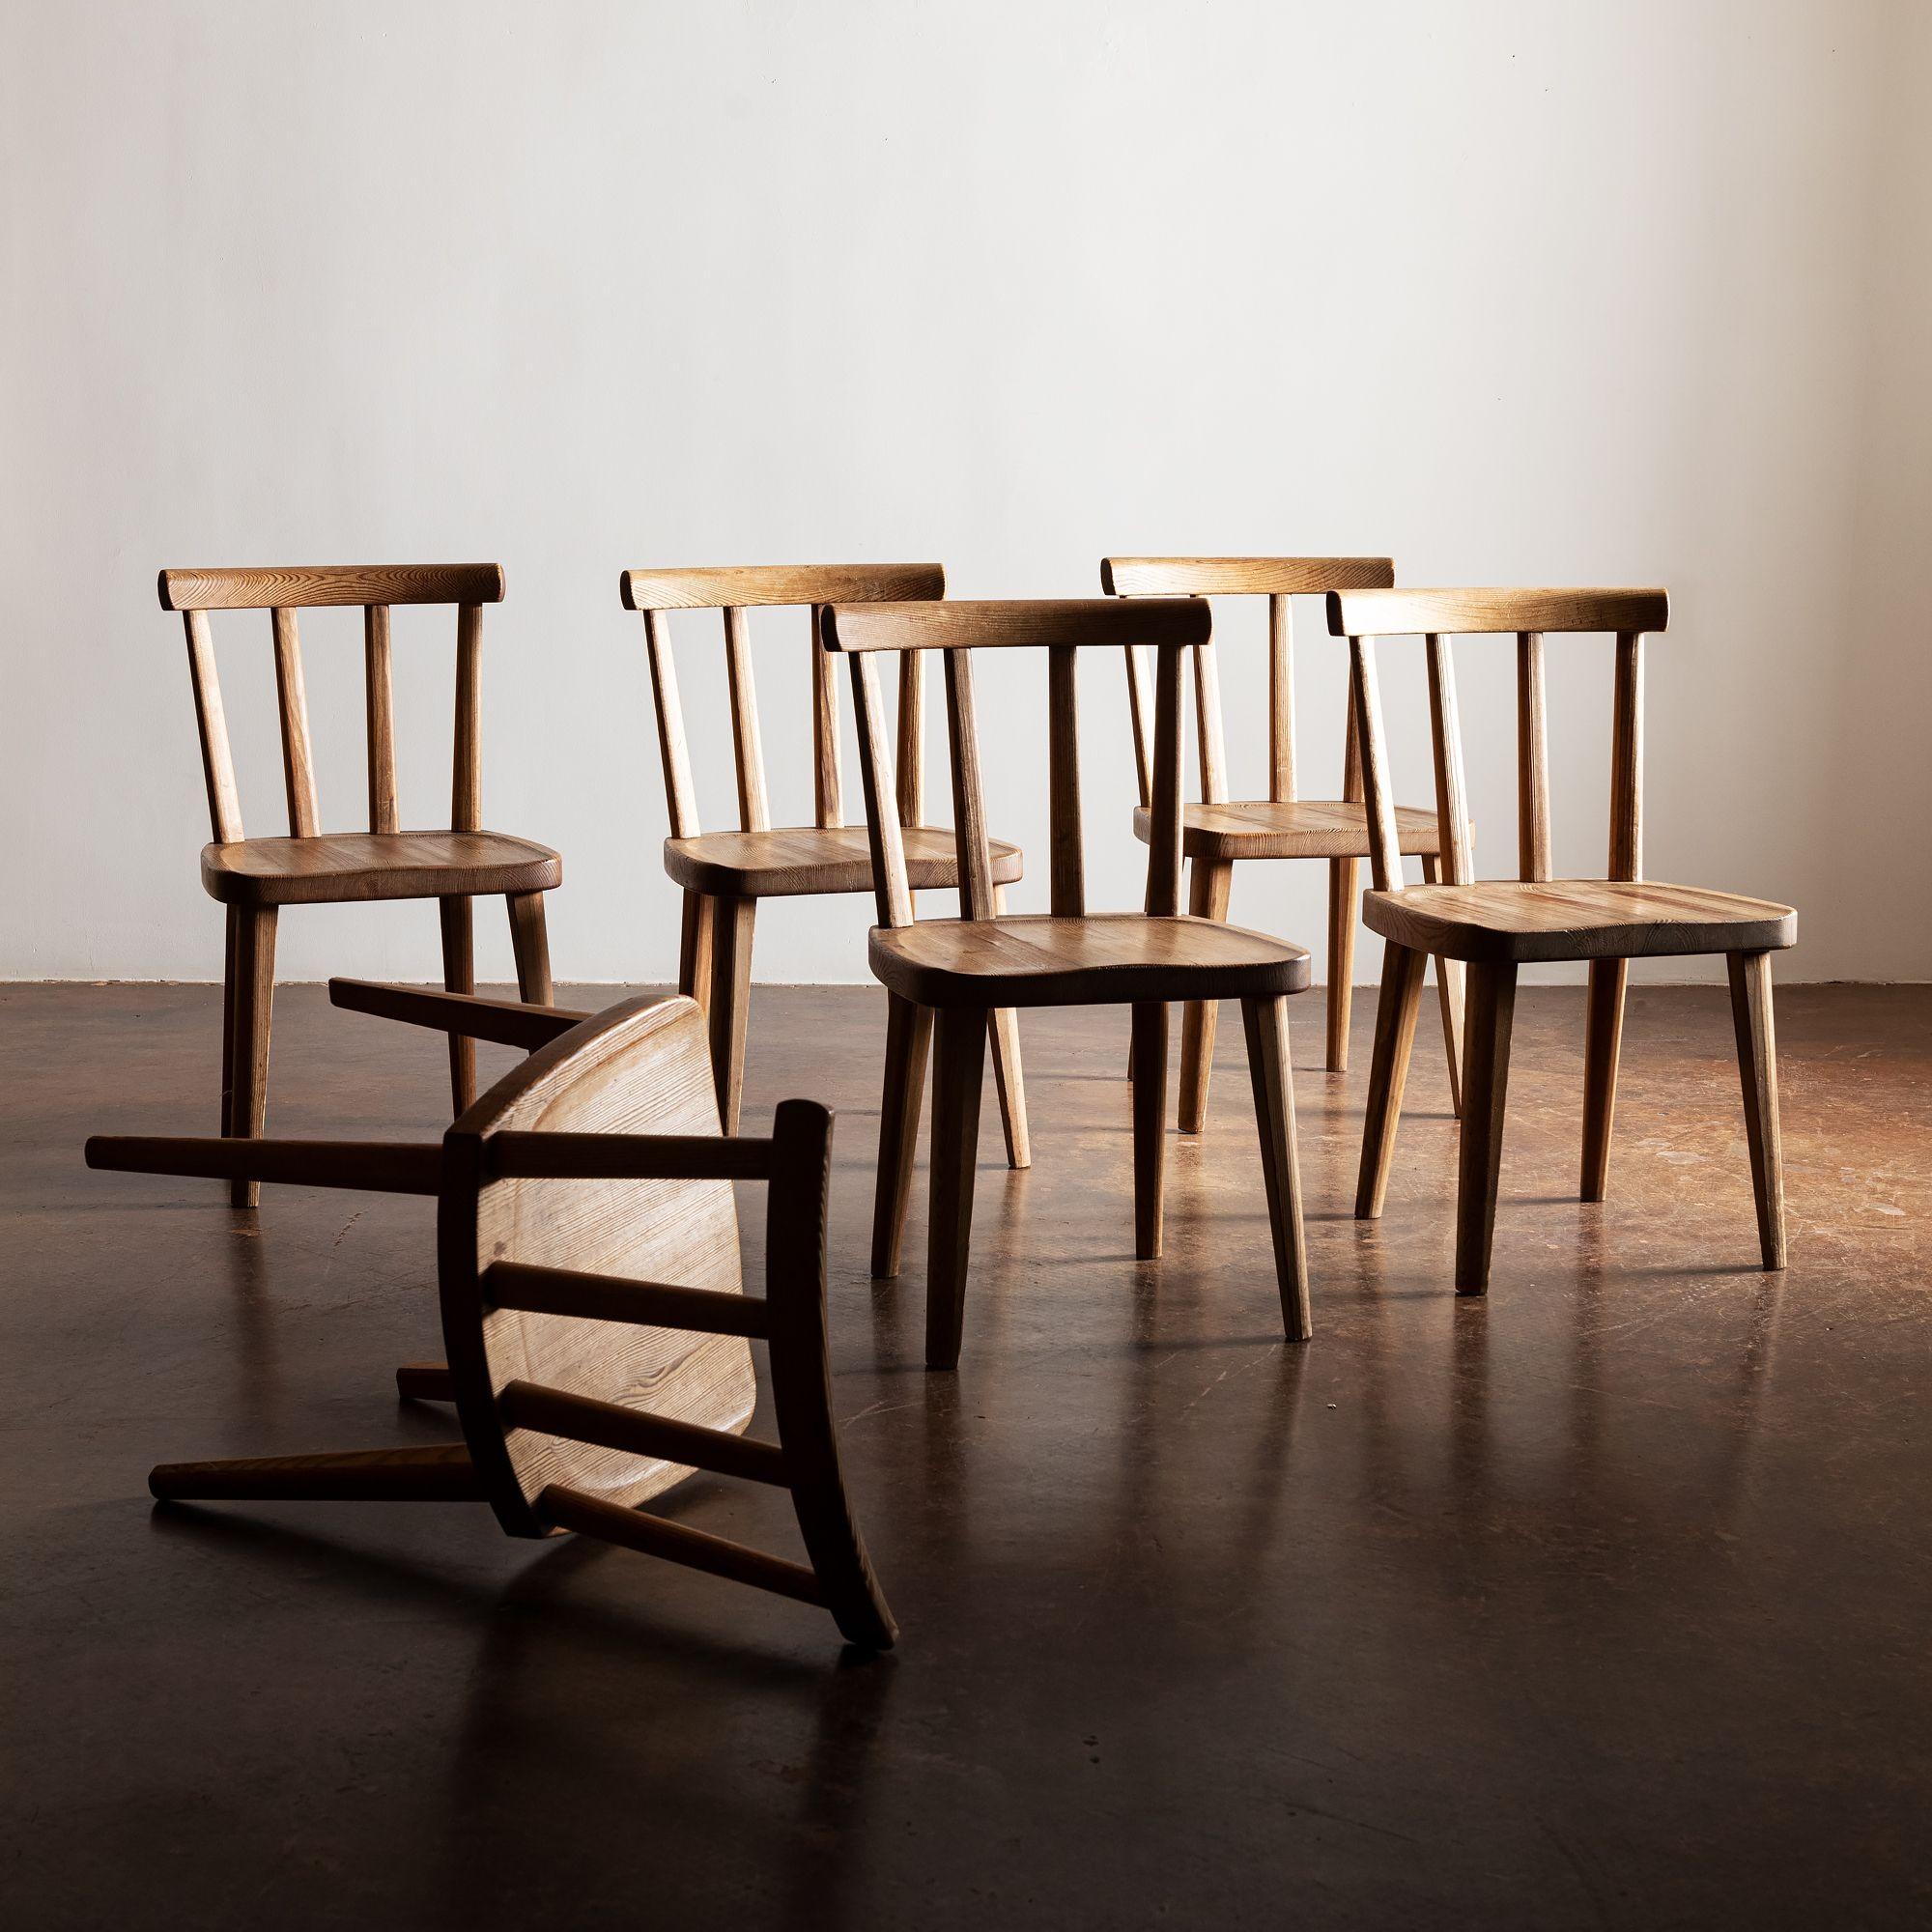 An enduring iconic form designed in 1932 by Axel Einar Hjorth in pine for Nordiska Kompaniet.